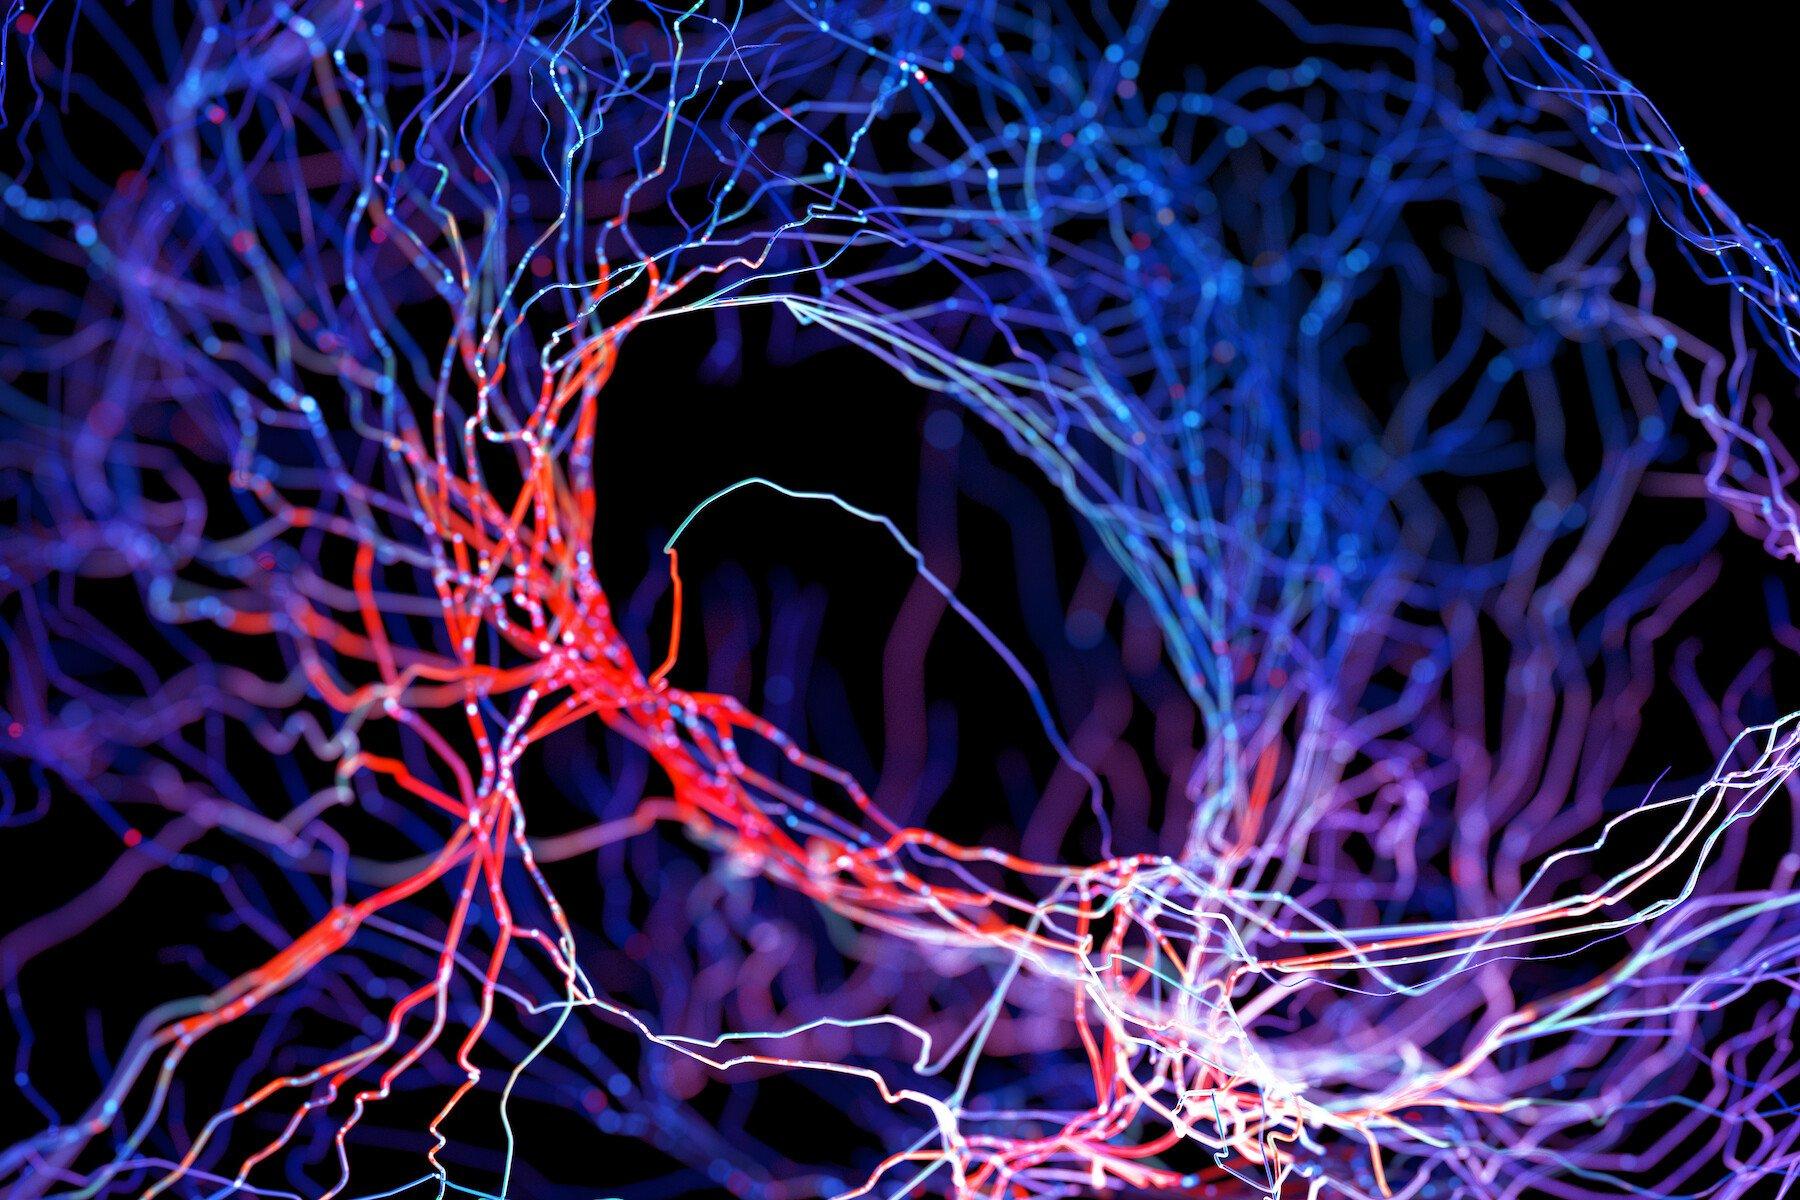 An abstract illustration of glowing blue, red and purple neurons on a black background, gives the impression of electricity or information passing through the spiral of tendrils.